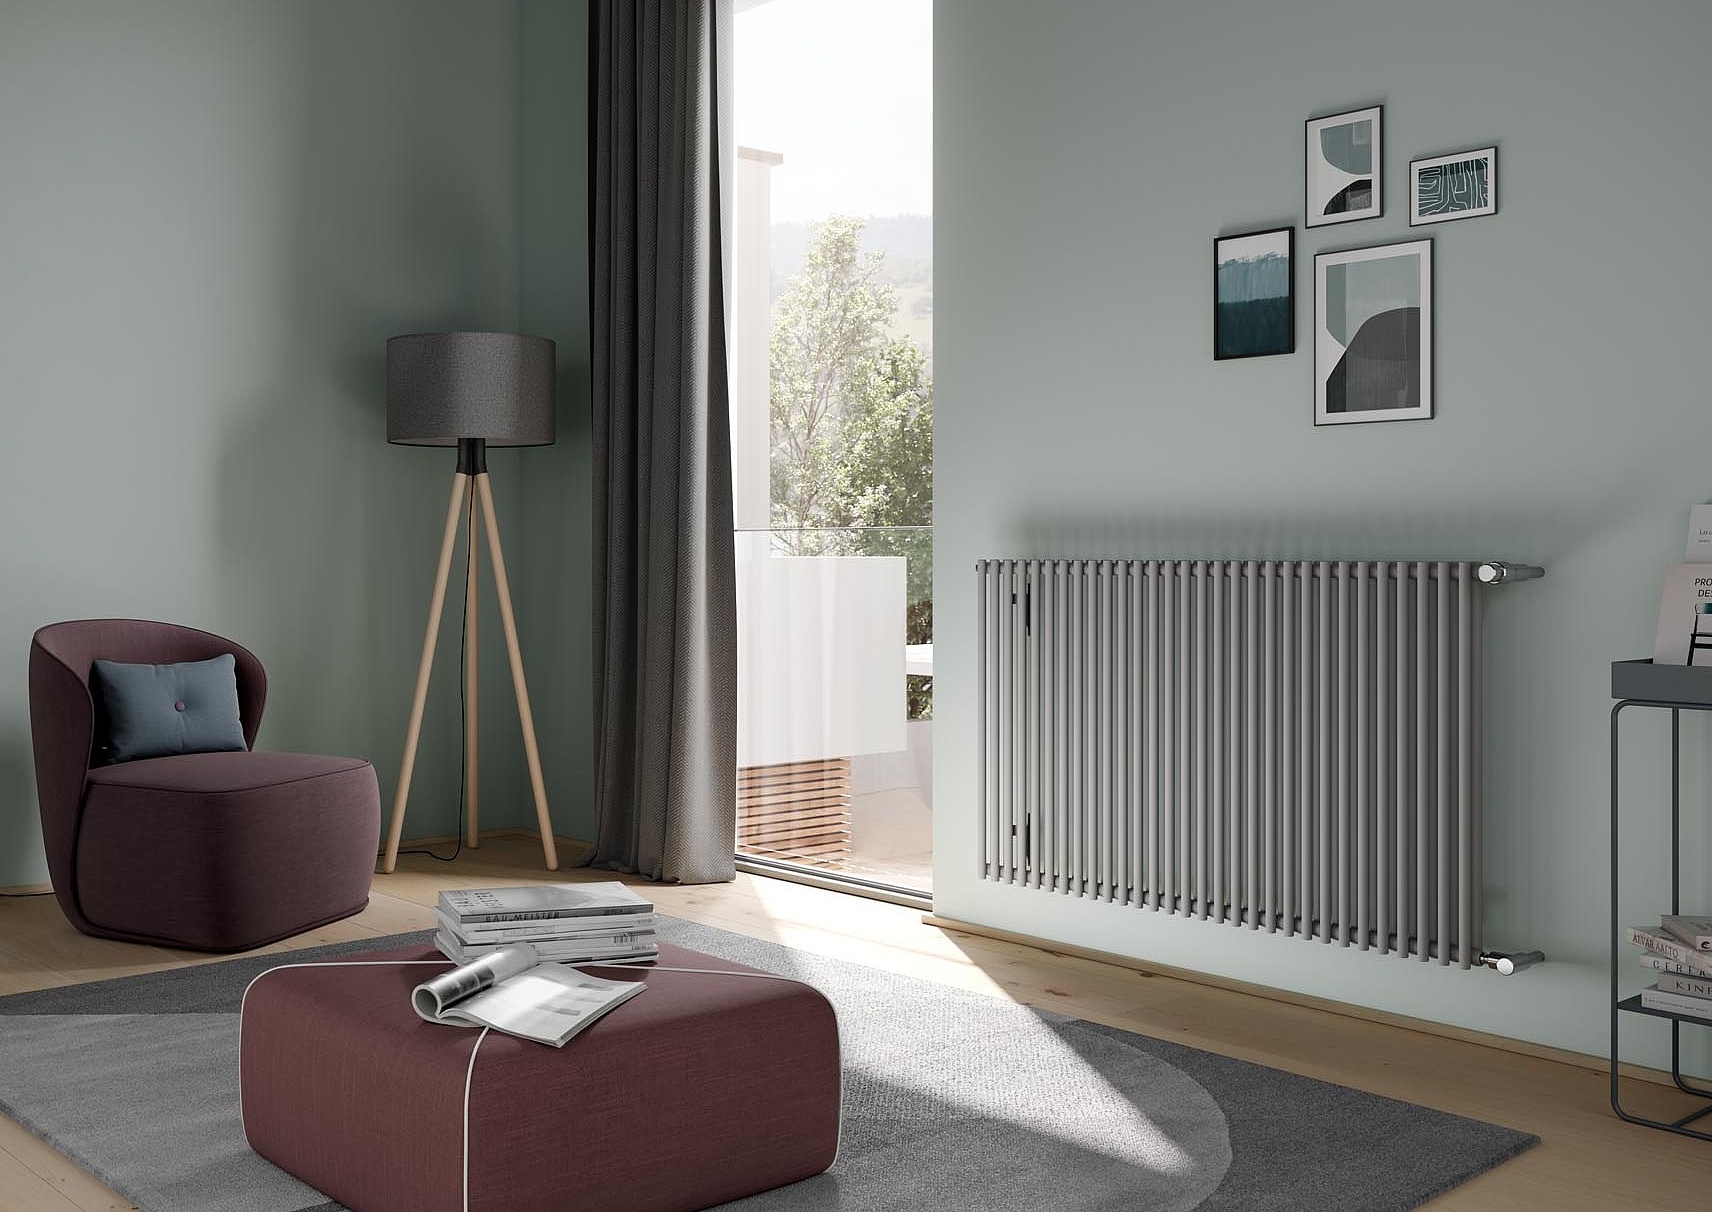 Kermi Pio design and bathroom radiators available in different heights and lengths.